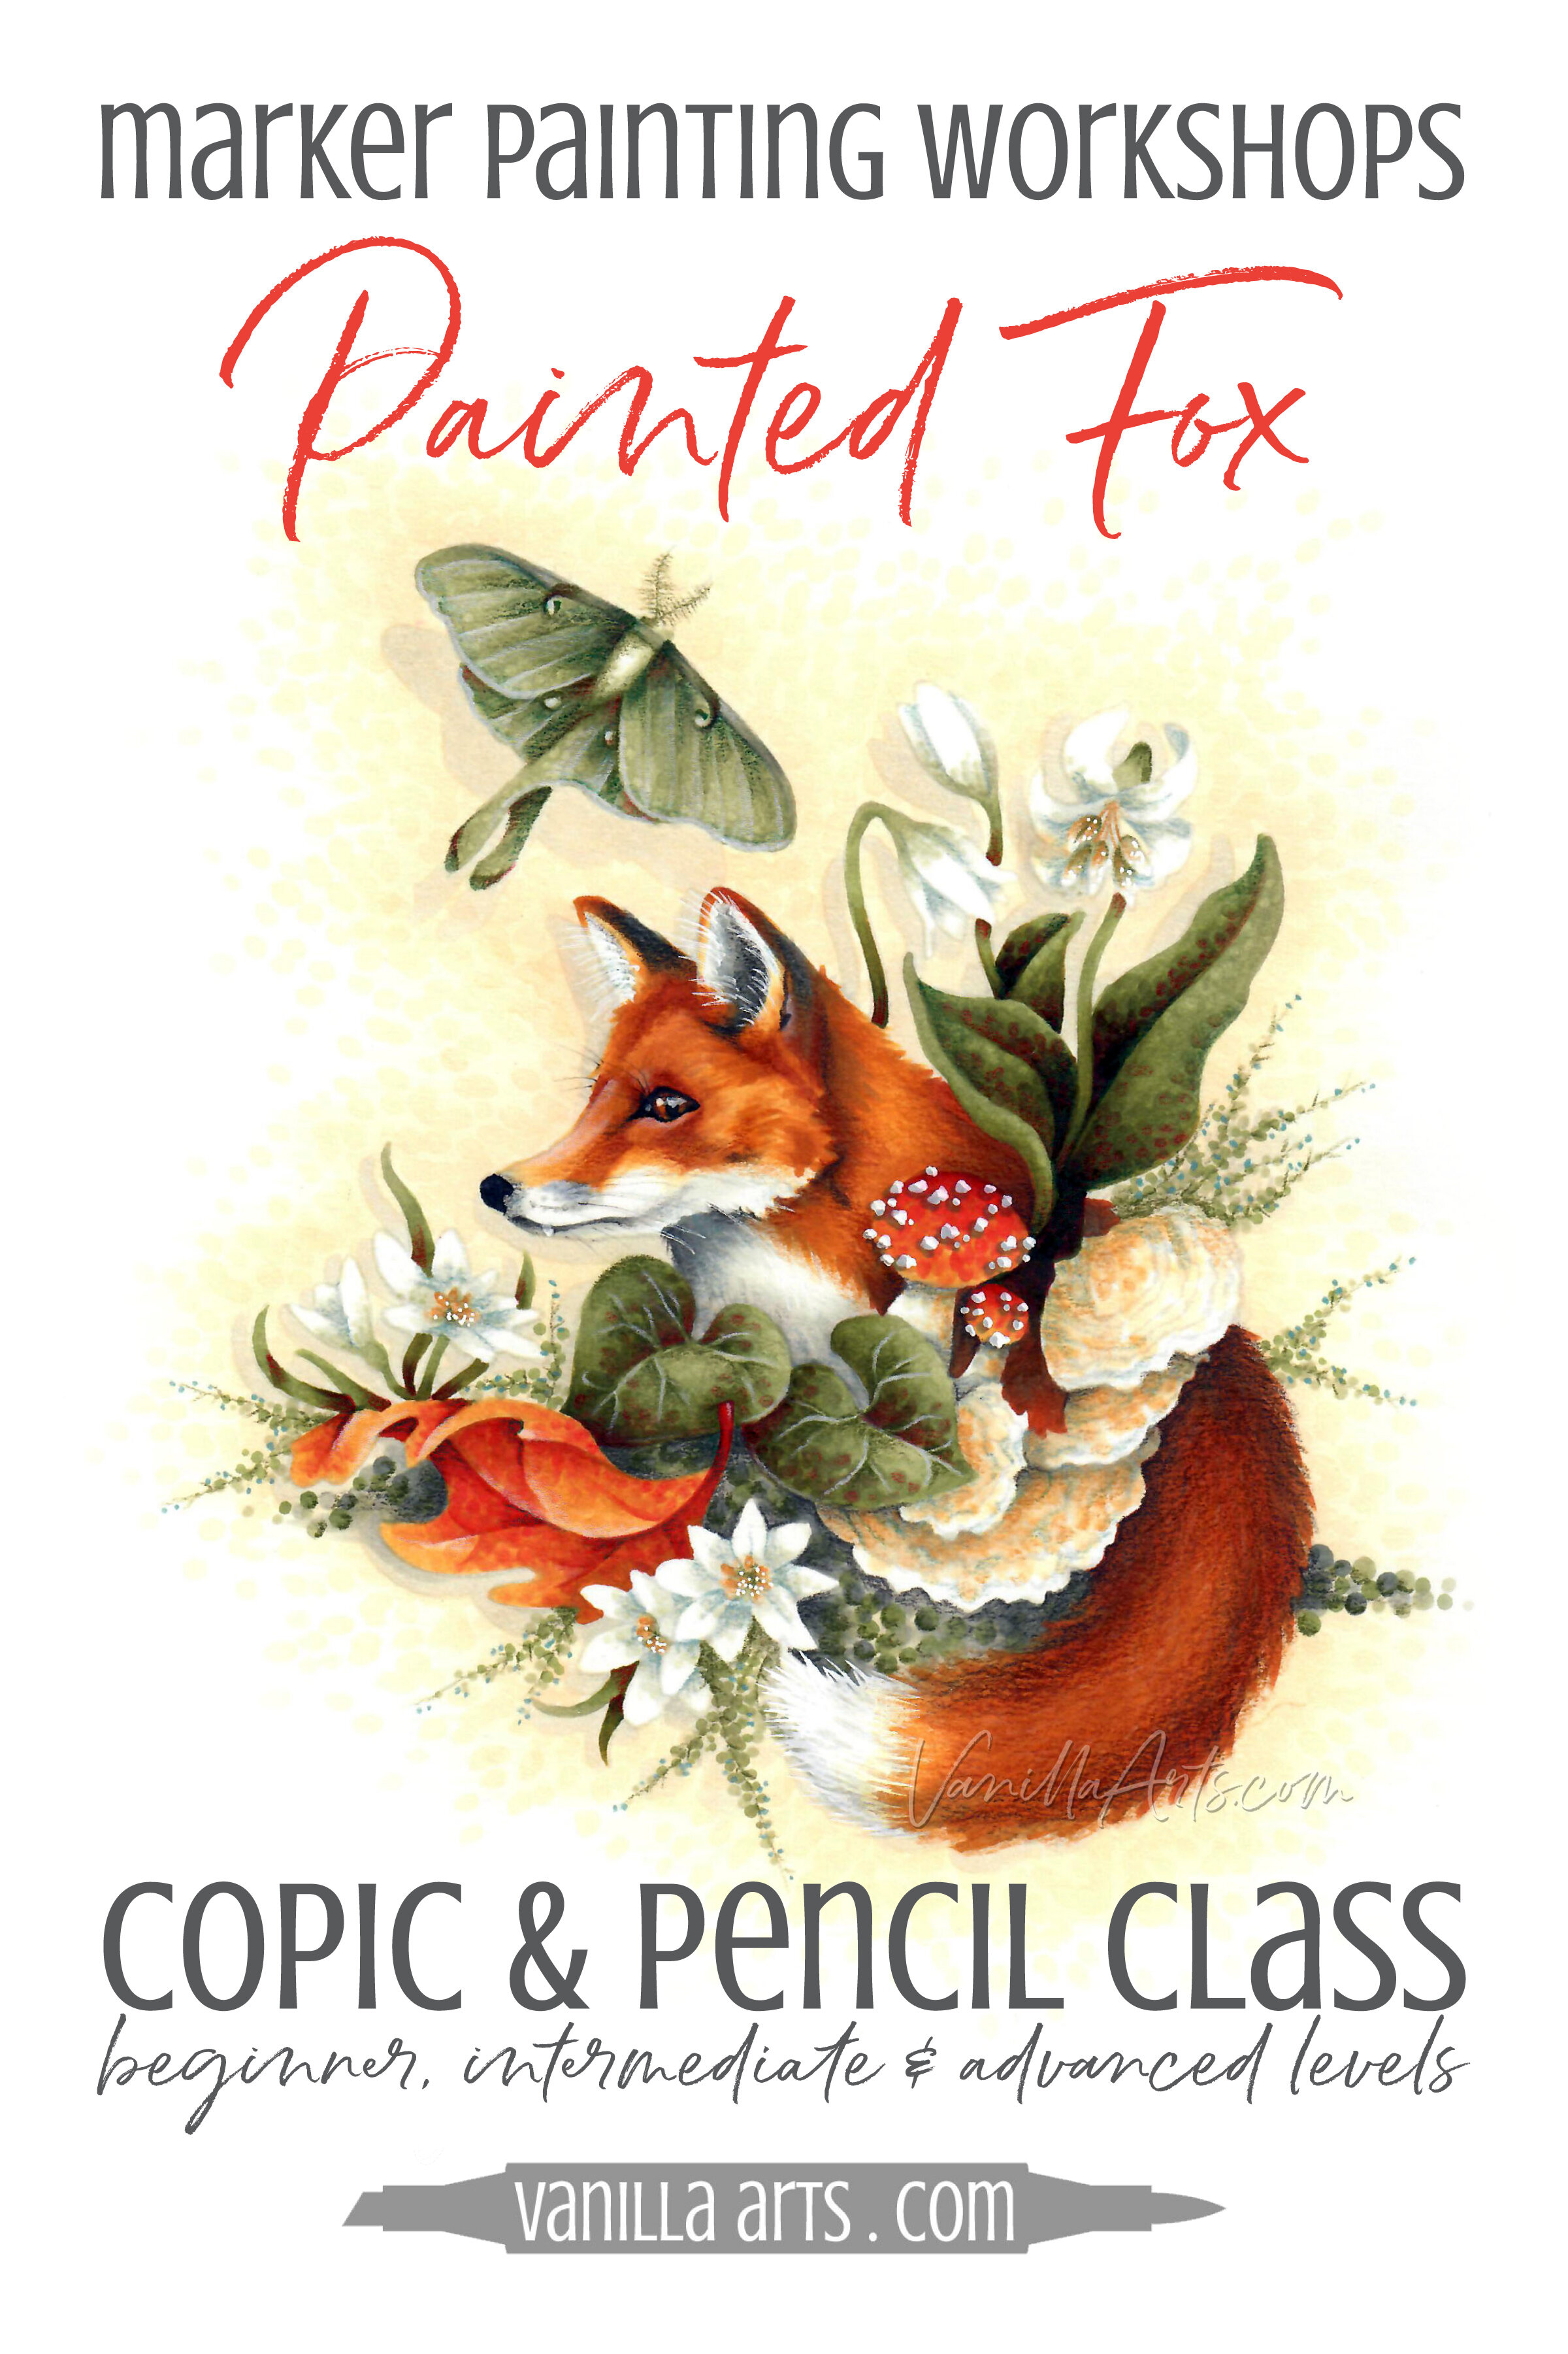 Prismacolor Technique Digital Art Lesson, Animal Drawing Set, Level 1 How  to Draw Animals with Colored Pencils, Graphite Pencils, Fox Drawing Lesson